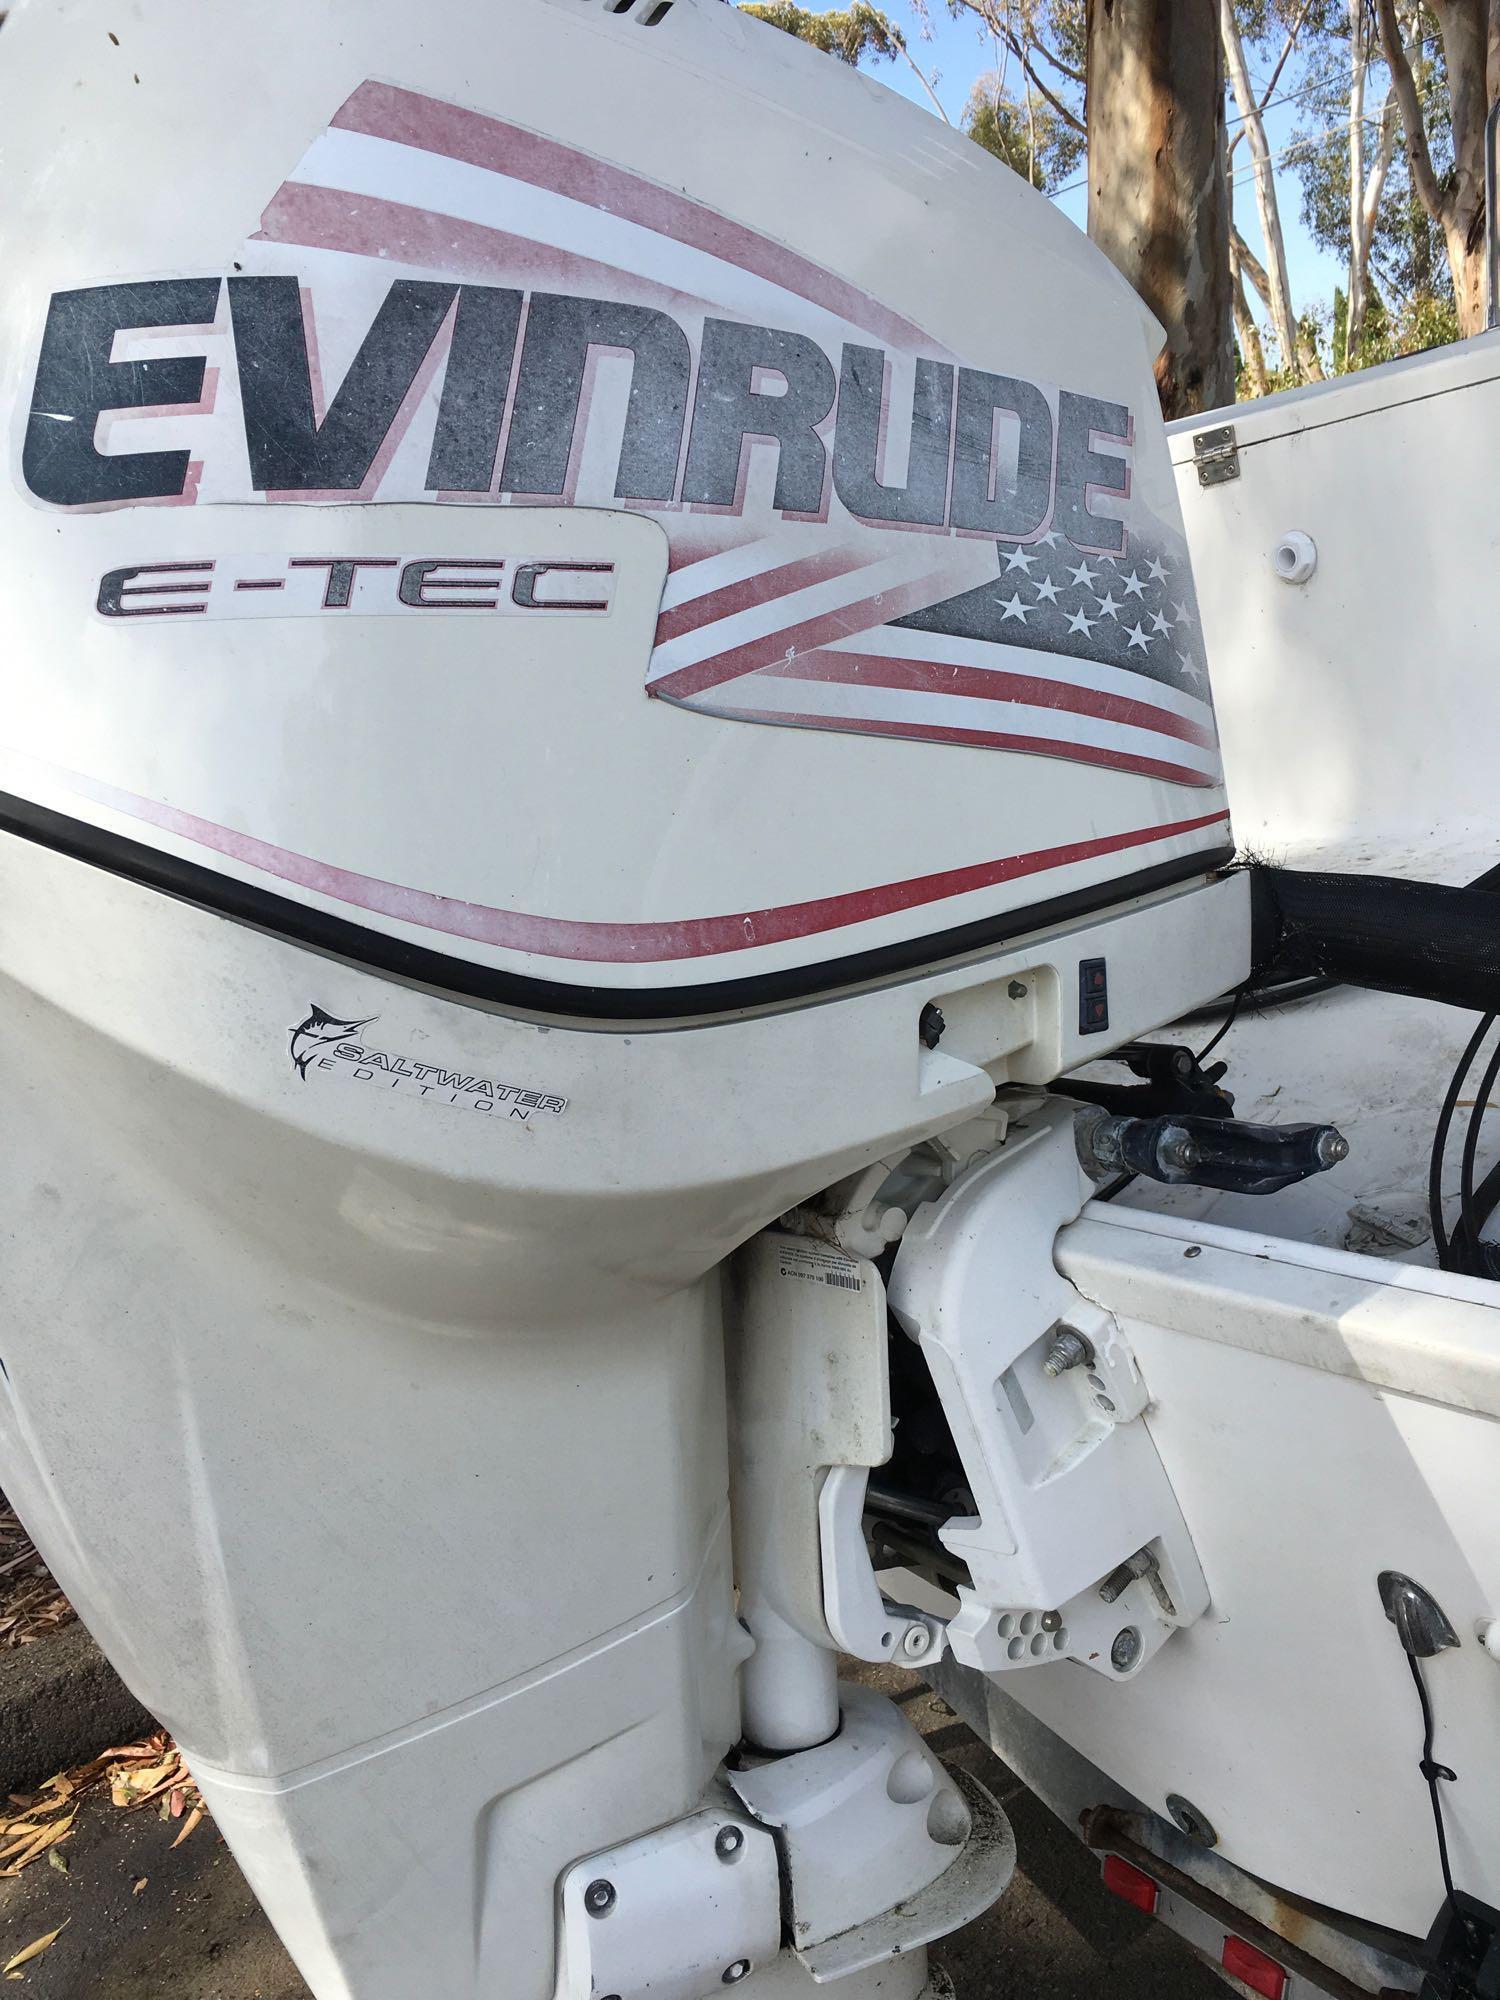 1998 SeaSwirl Striper 2300 with Evinrude  E-Tec (engine turns over) # 6 injector needs replacement